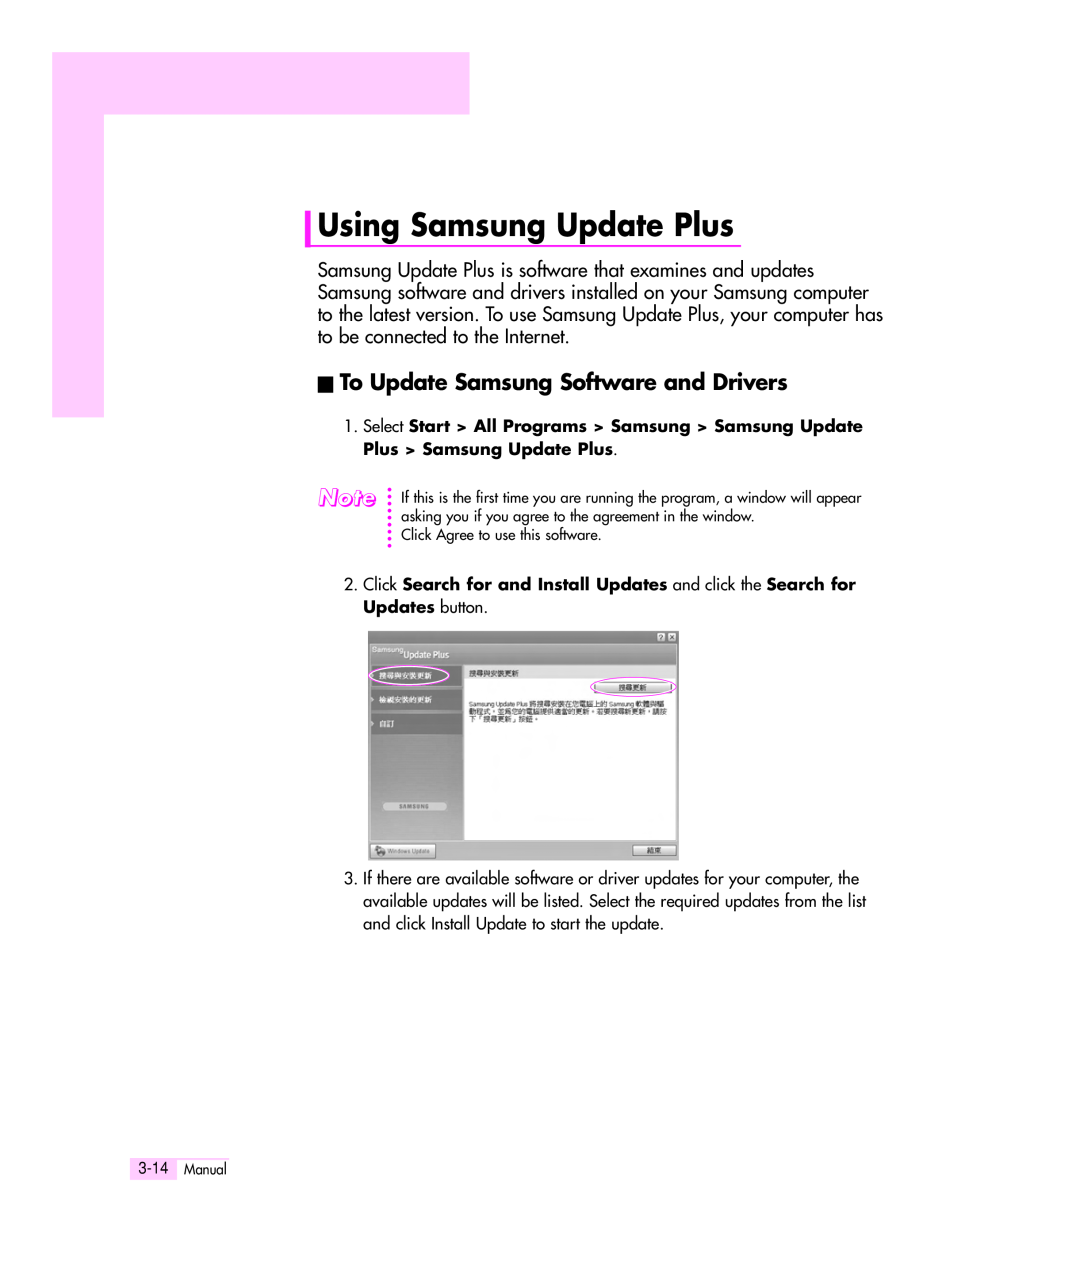 Samsung Q35 manual Using Samsung Update Plus, To Update Samsung Software and Drivers 